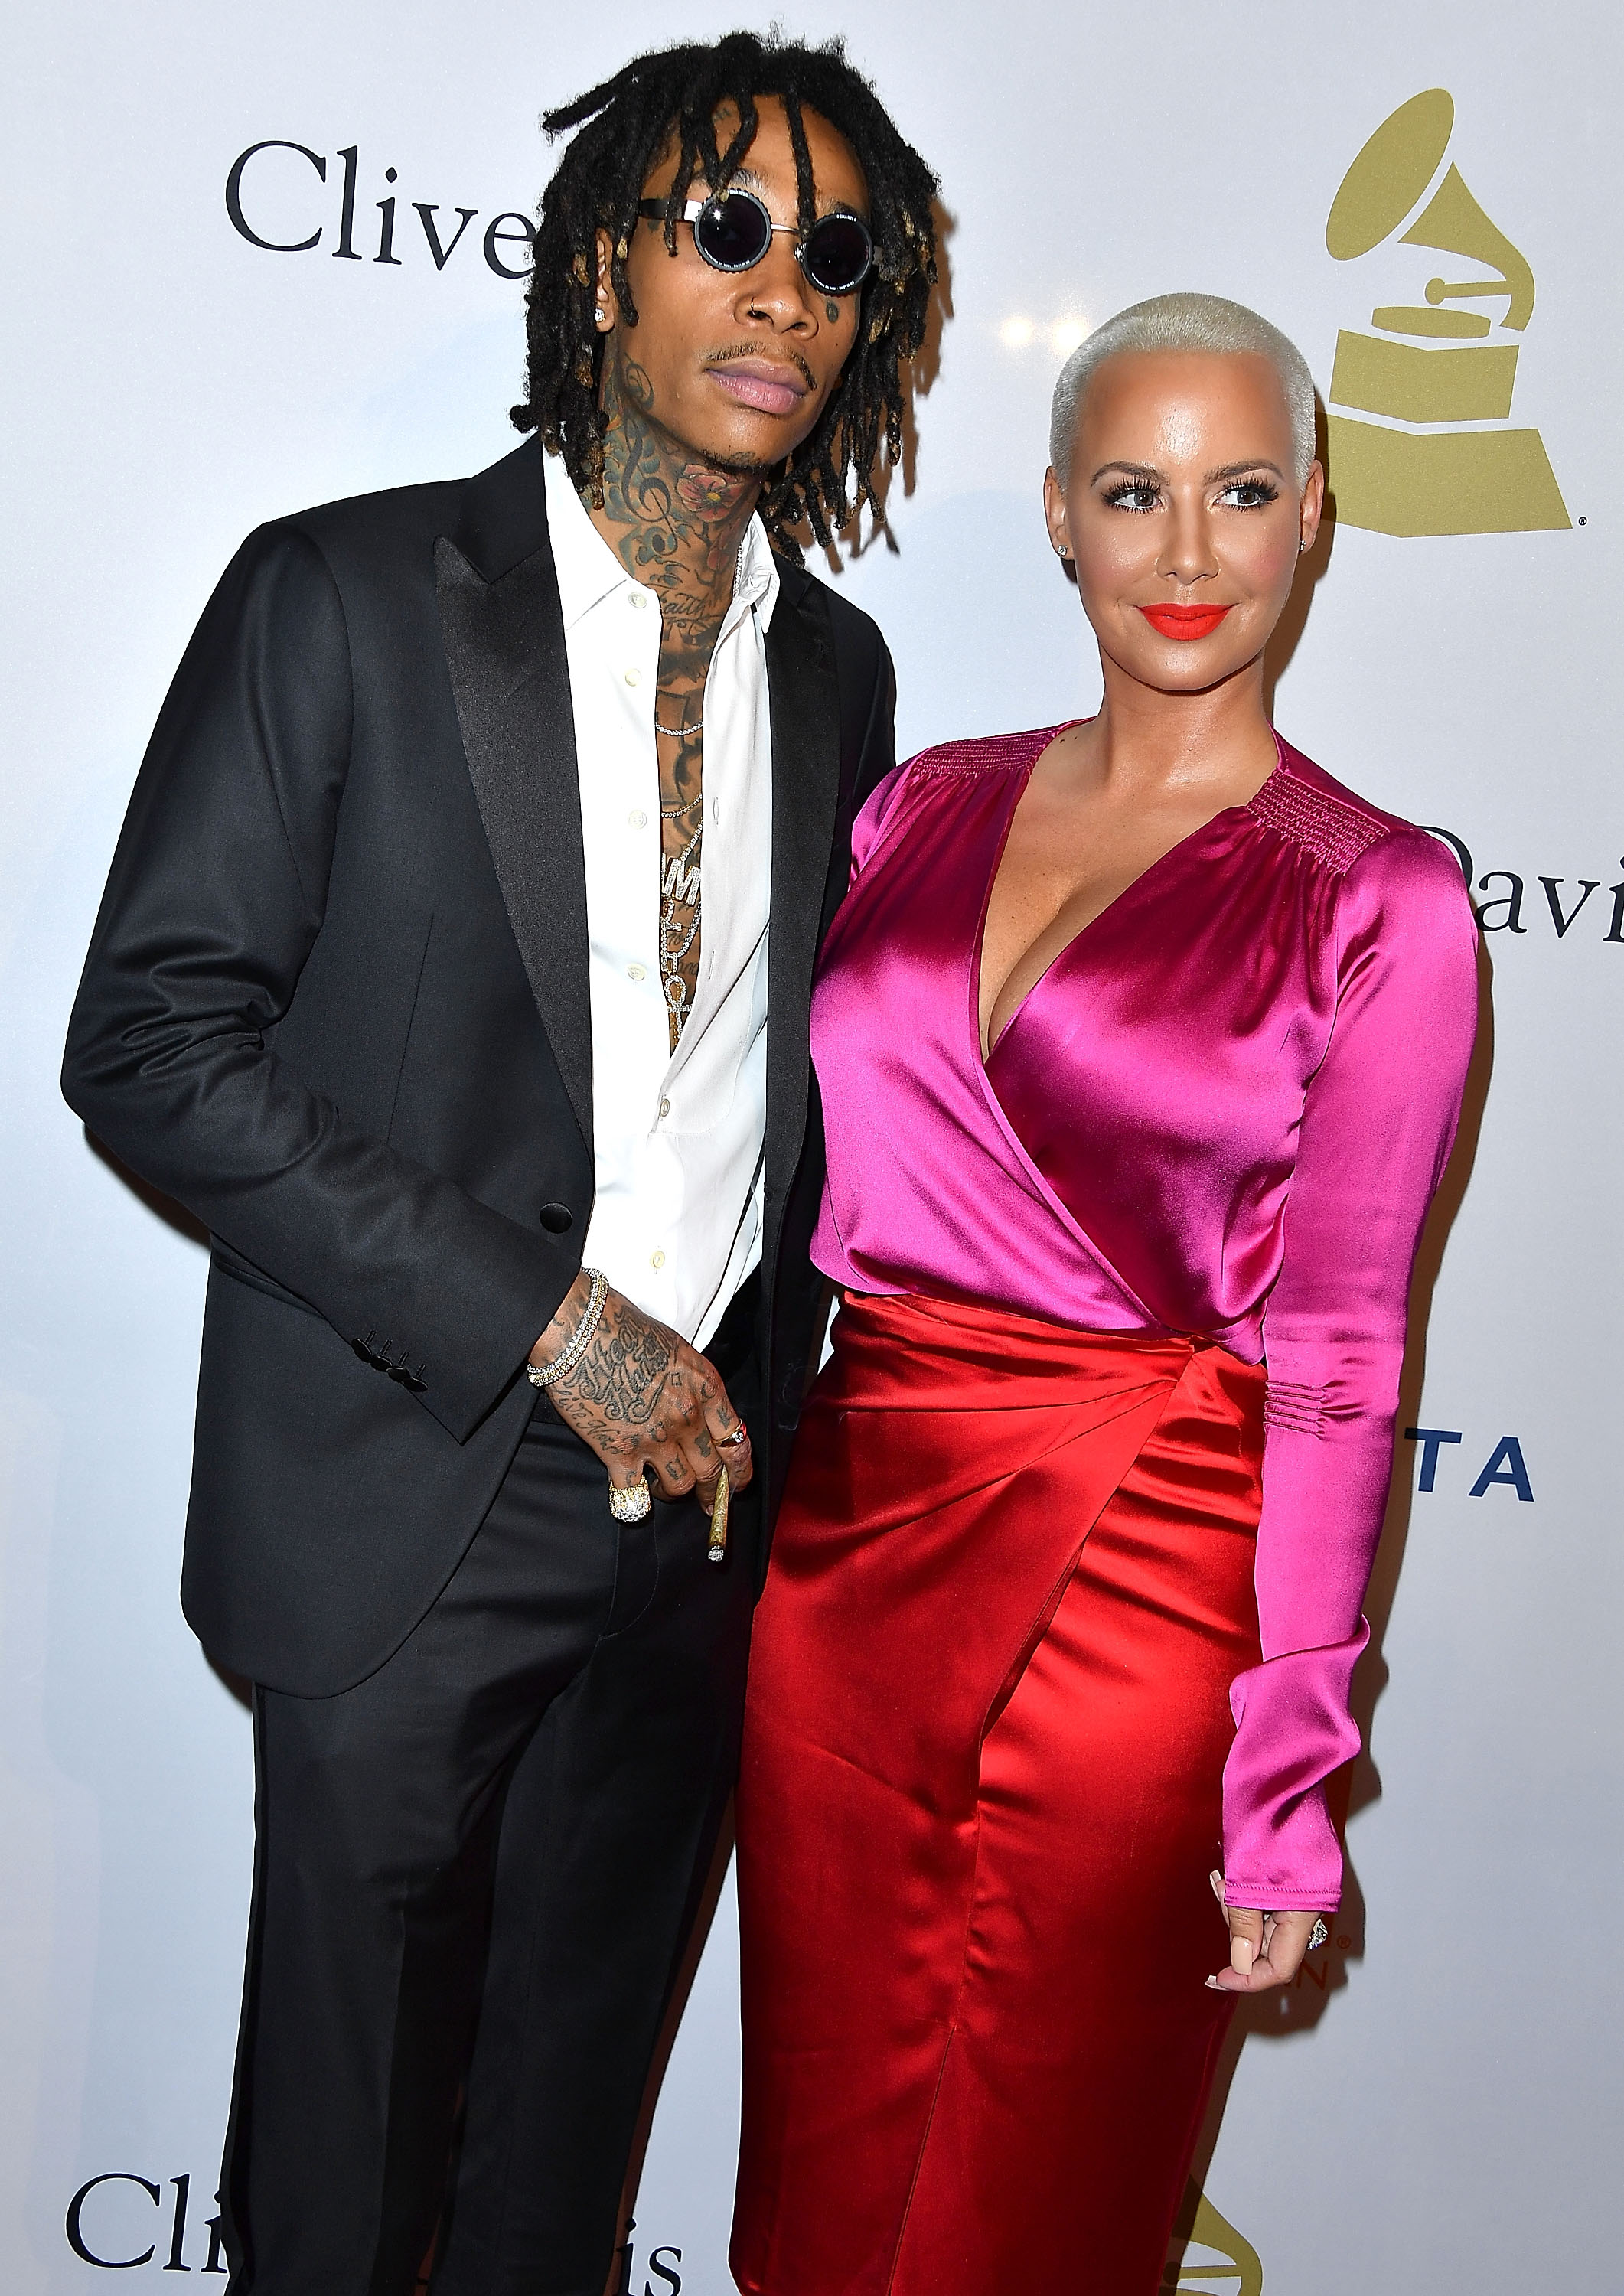 Amber Rose Officially Covers Wiz Khalifa Tattoo With Portrait of Another